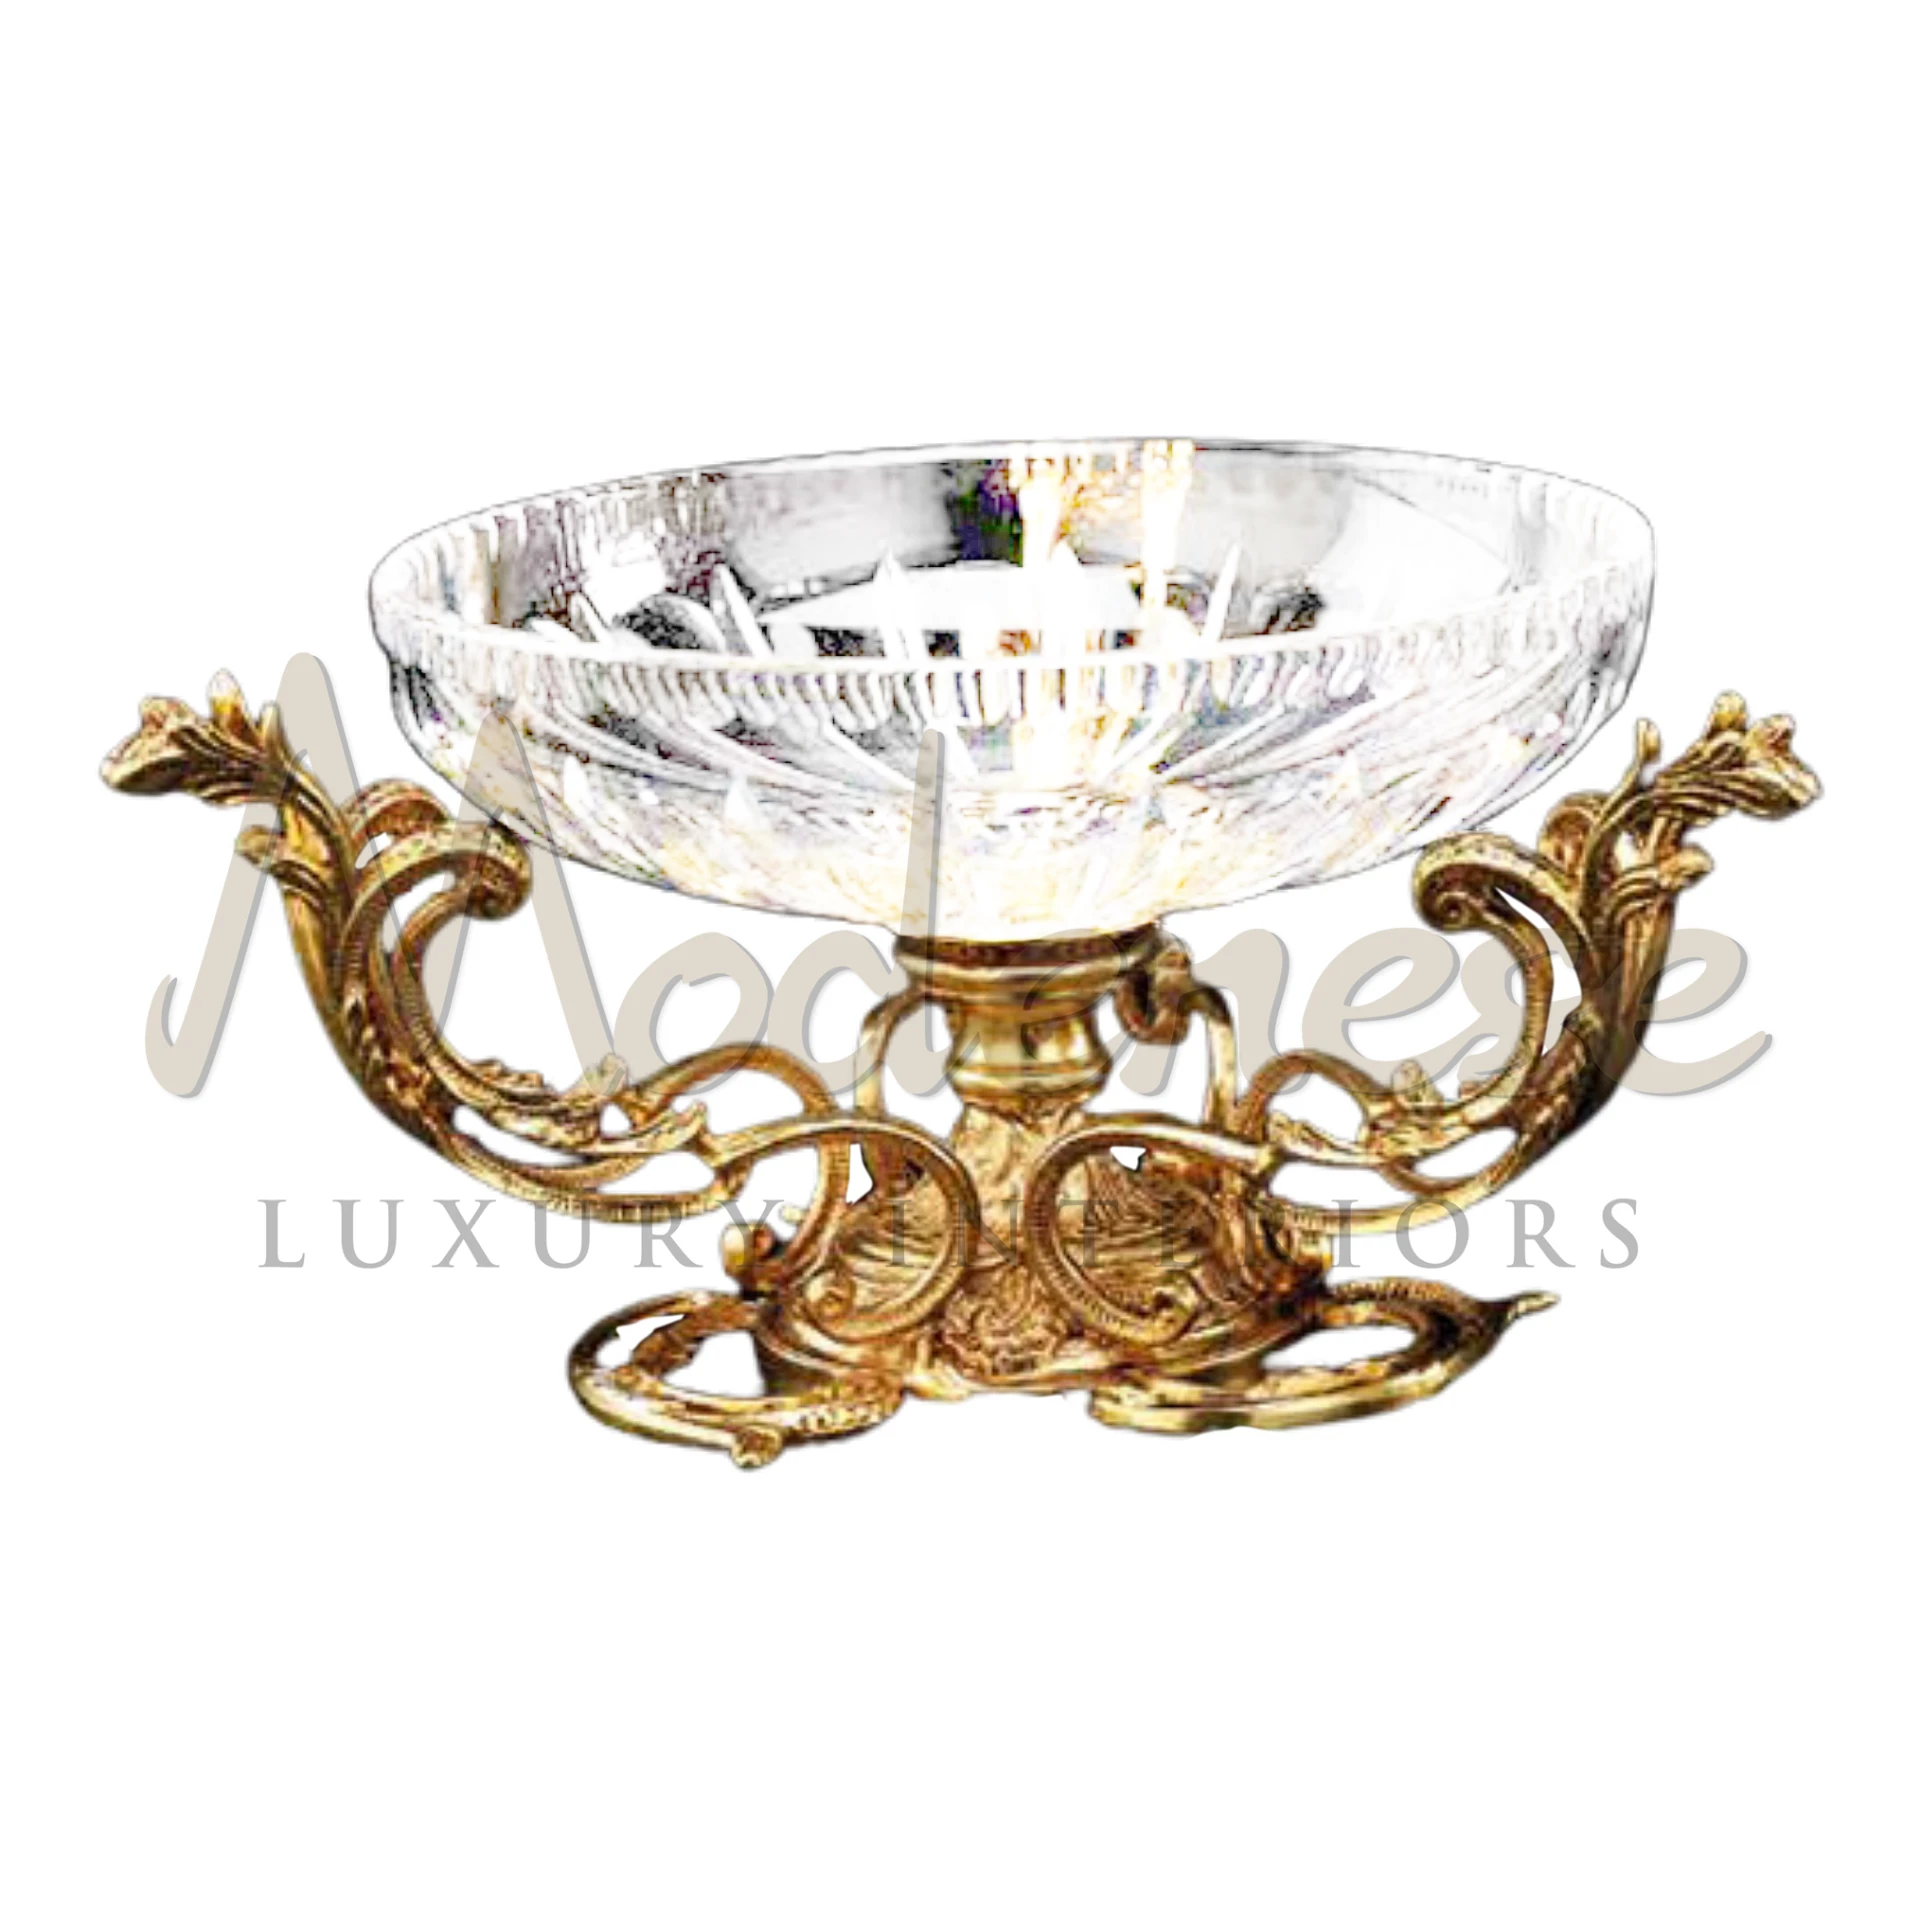 Modenese Gorgeous Gold Elements Bowl, crafted with luxury in mind, featuring intricate gold detailing on high-quality glass or crystal.